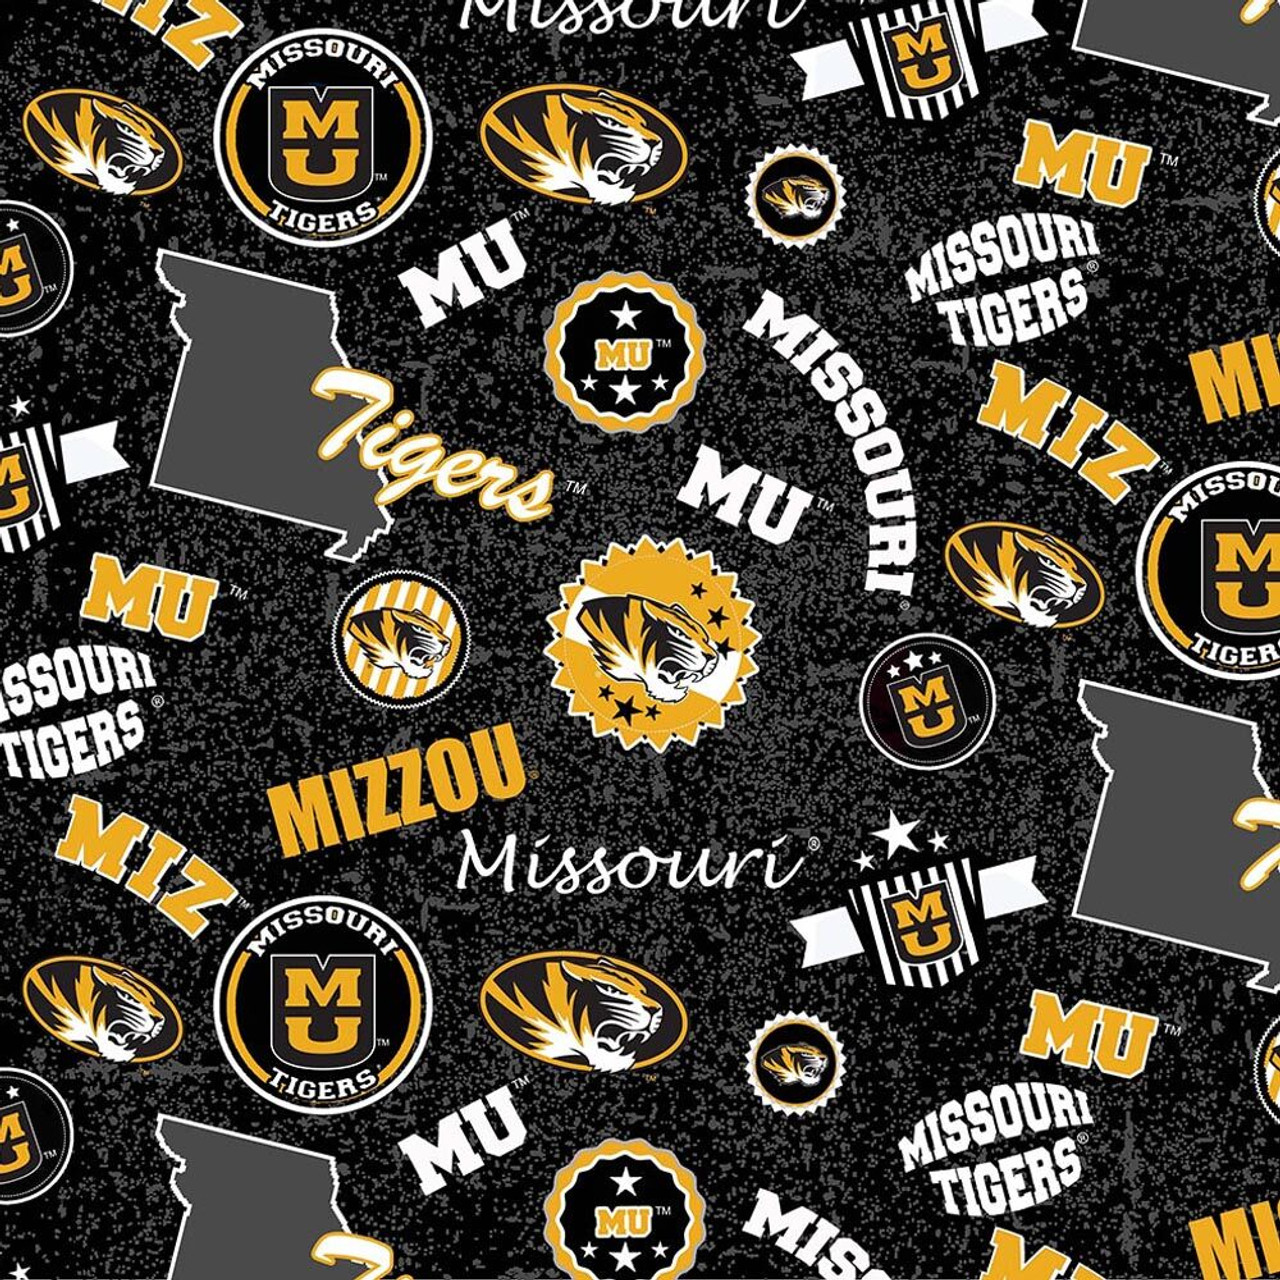 University of Missouri Tigers Cotton Fabric with Home State Print and Matching Solid Cotton Fabrics